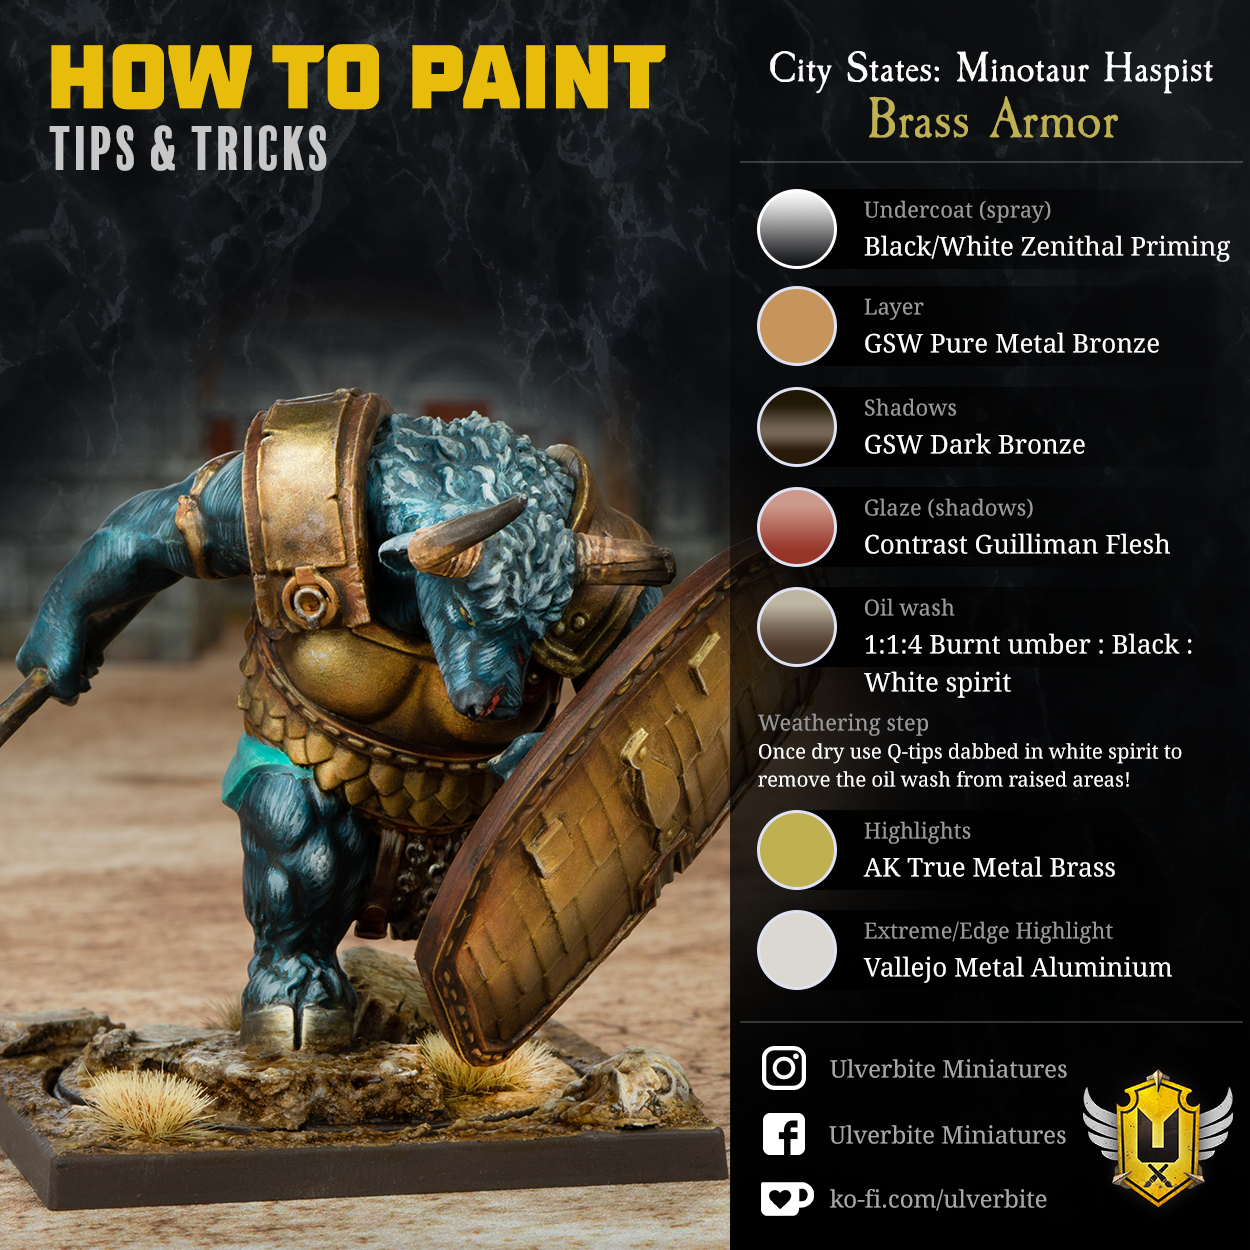 How to Paint Brass Armor — Ulverbite Miniatures